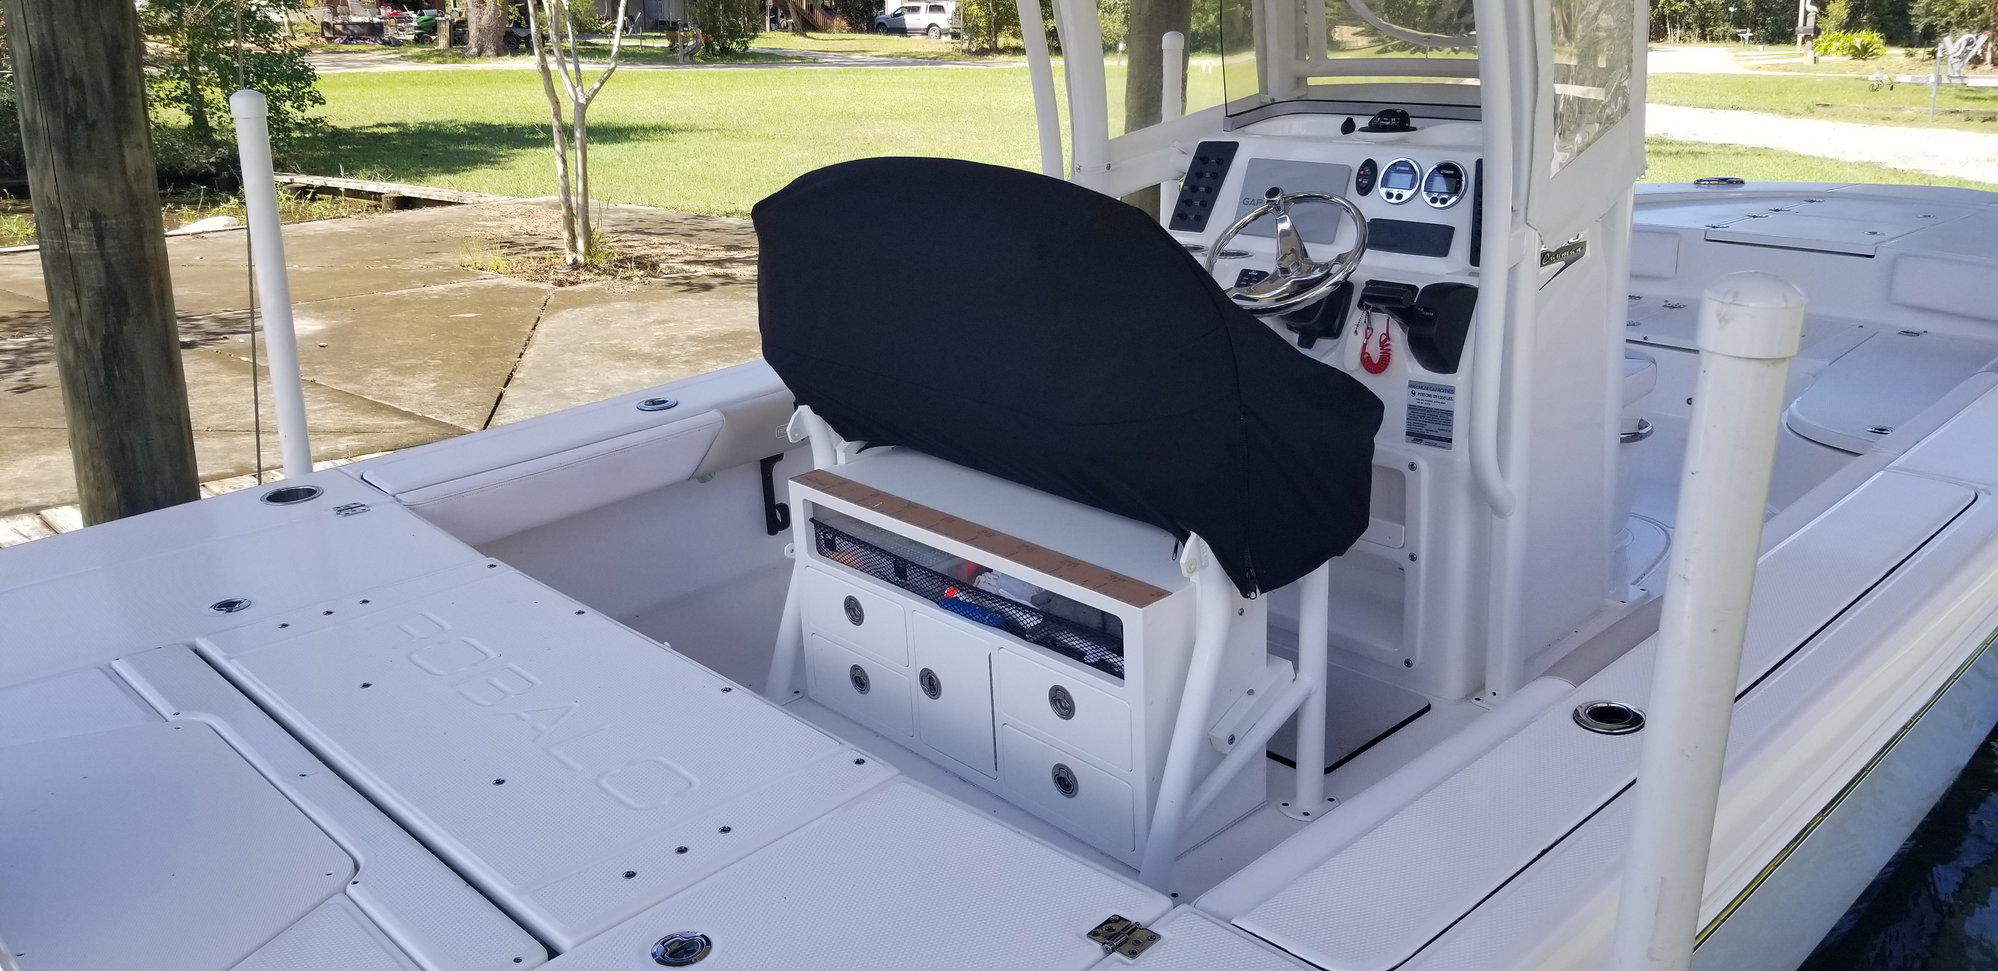 Has anyone installed one of these LP tackle centers? - The Hull Truth -  Boating and Fishing Forum